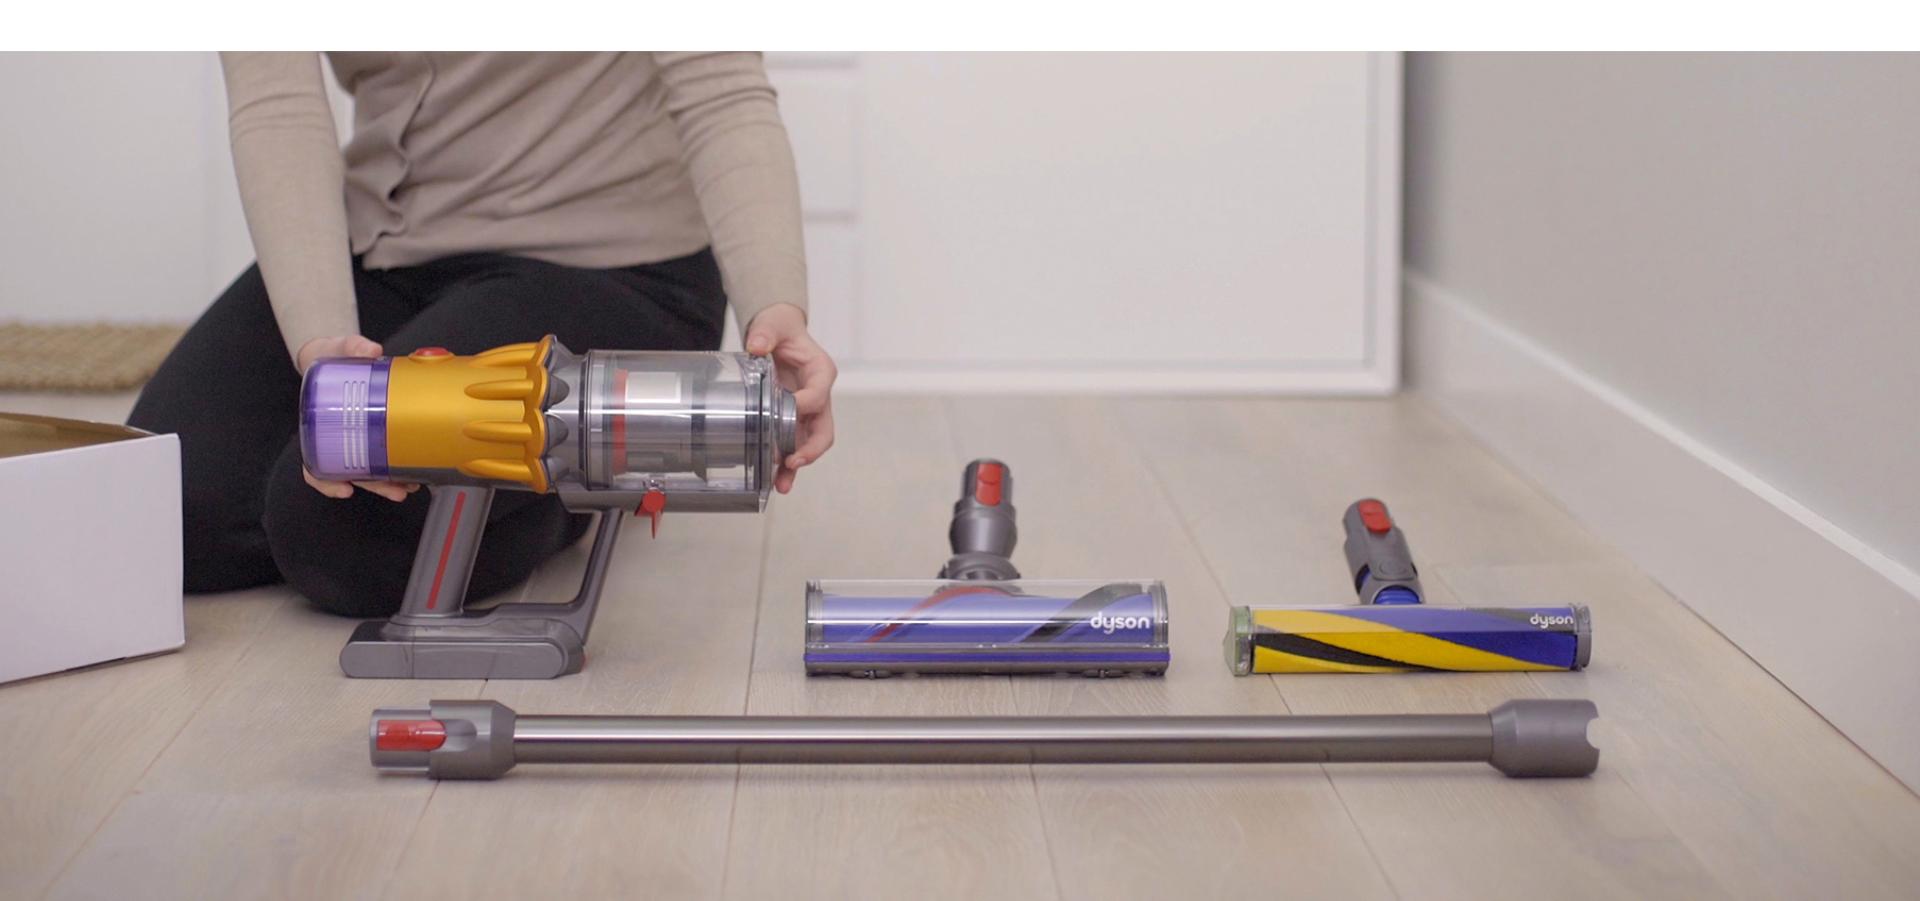 Someone holding the Dyson V12 Detect Slim vacuum while it's resting on the floor.